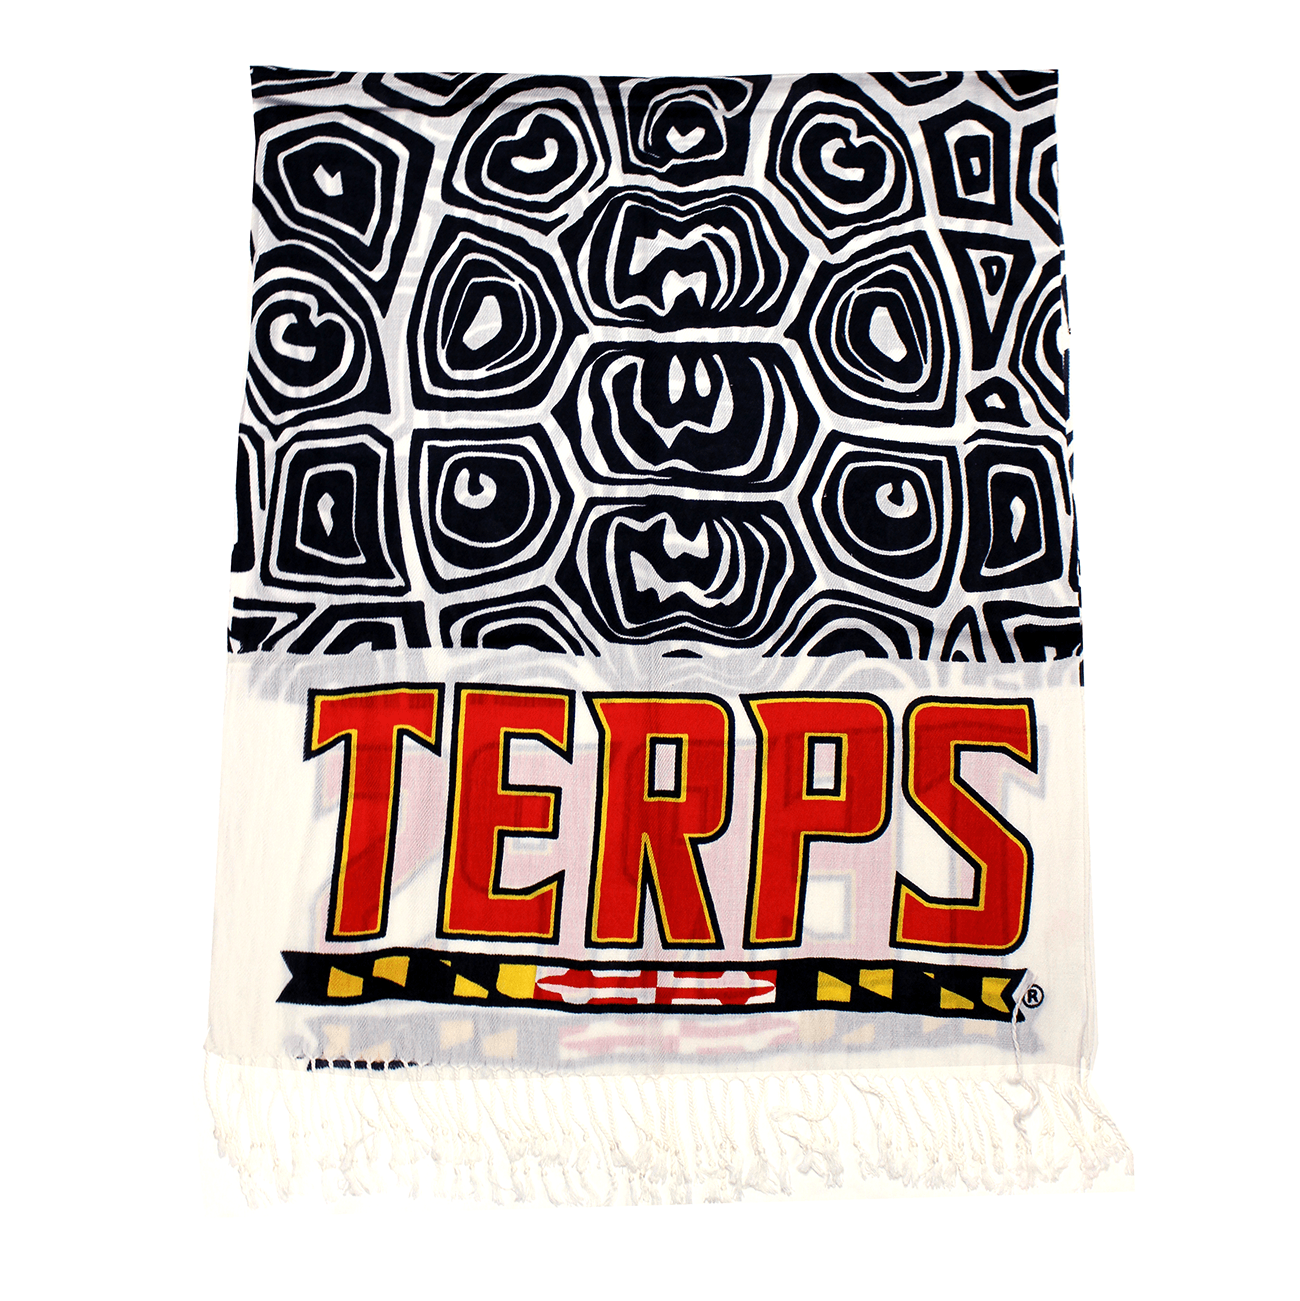 UMD Terps & Turtle Shell (White & Black) / Scarf - Route One Apparel